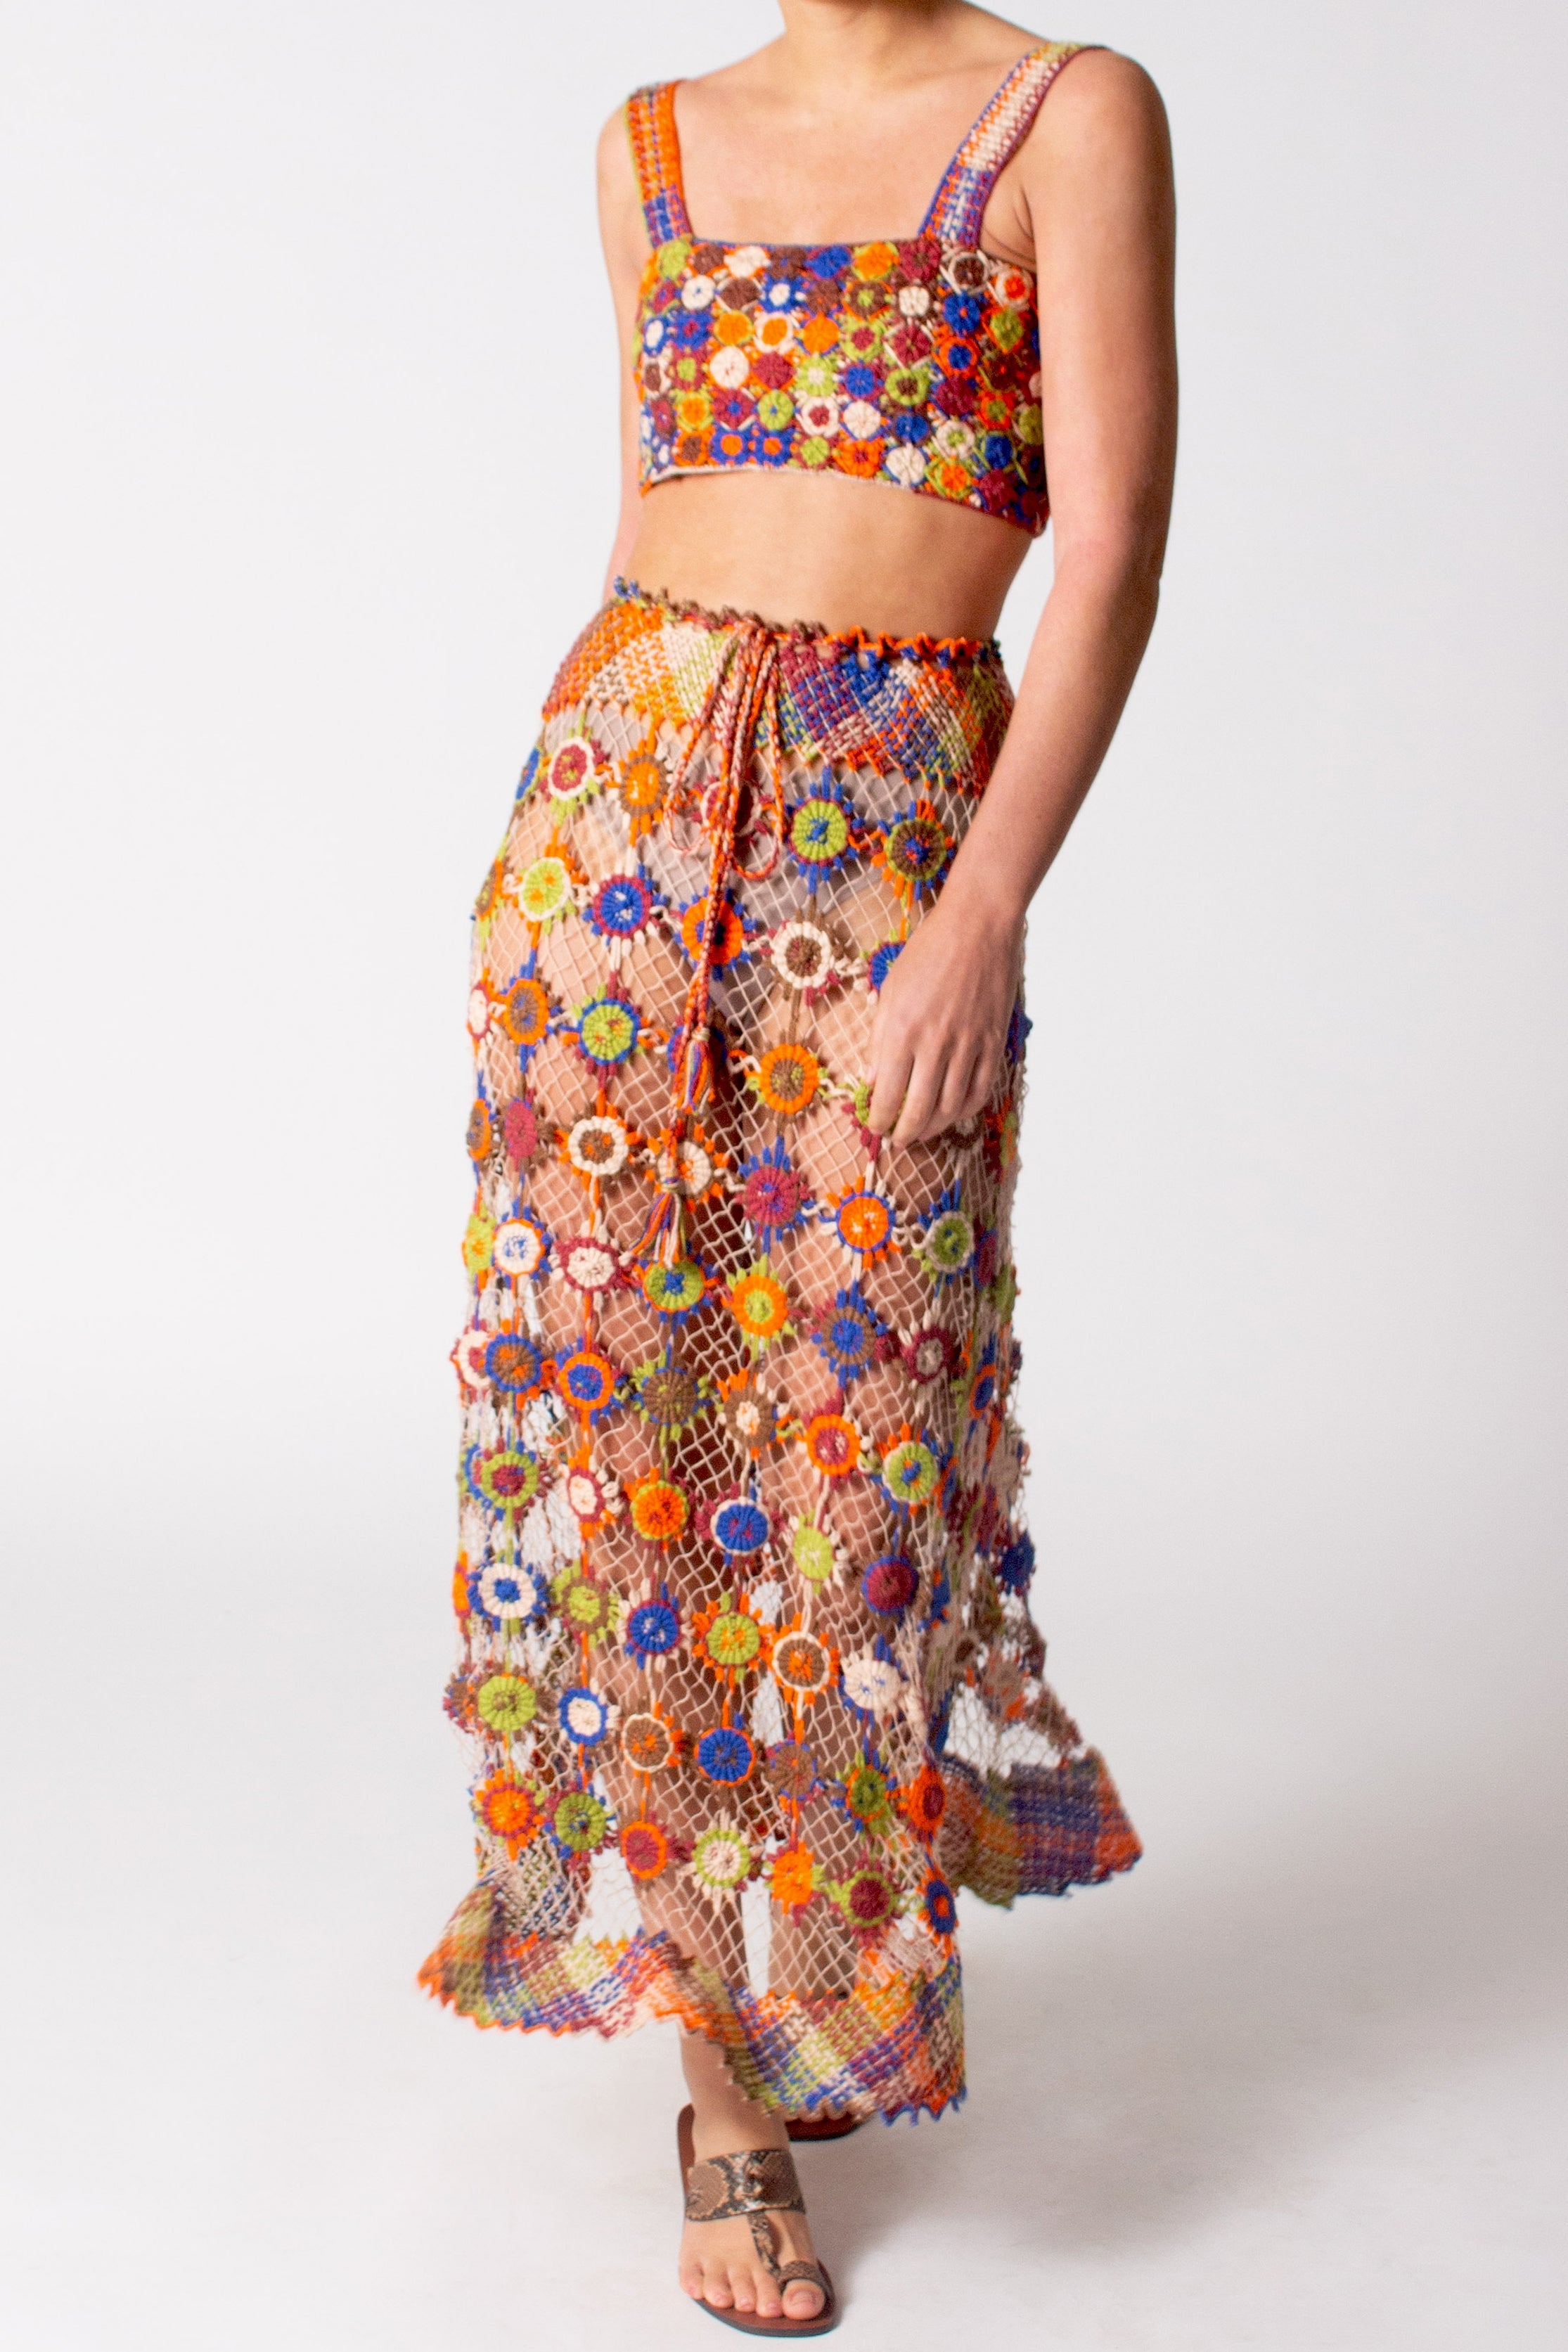 Pilar Hand Knit Maxi Skirt by Miguelina